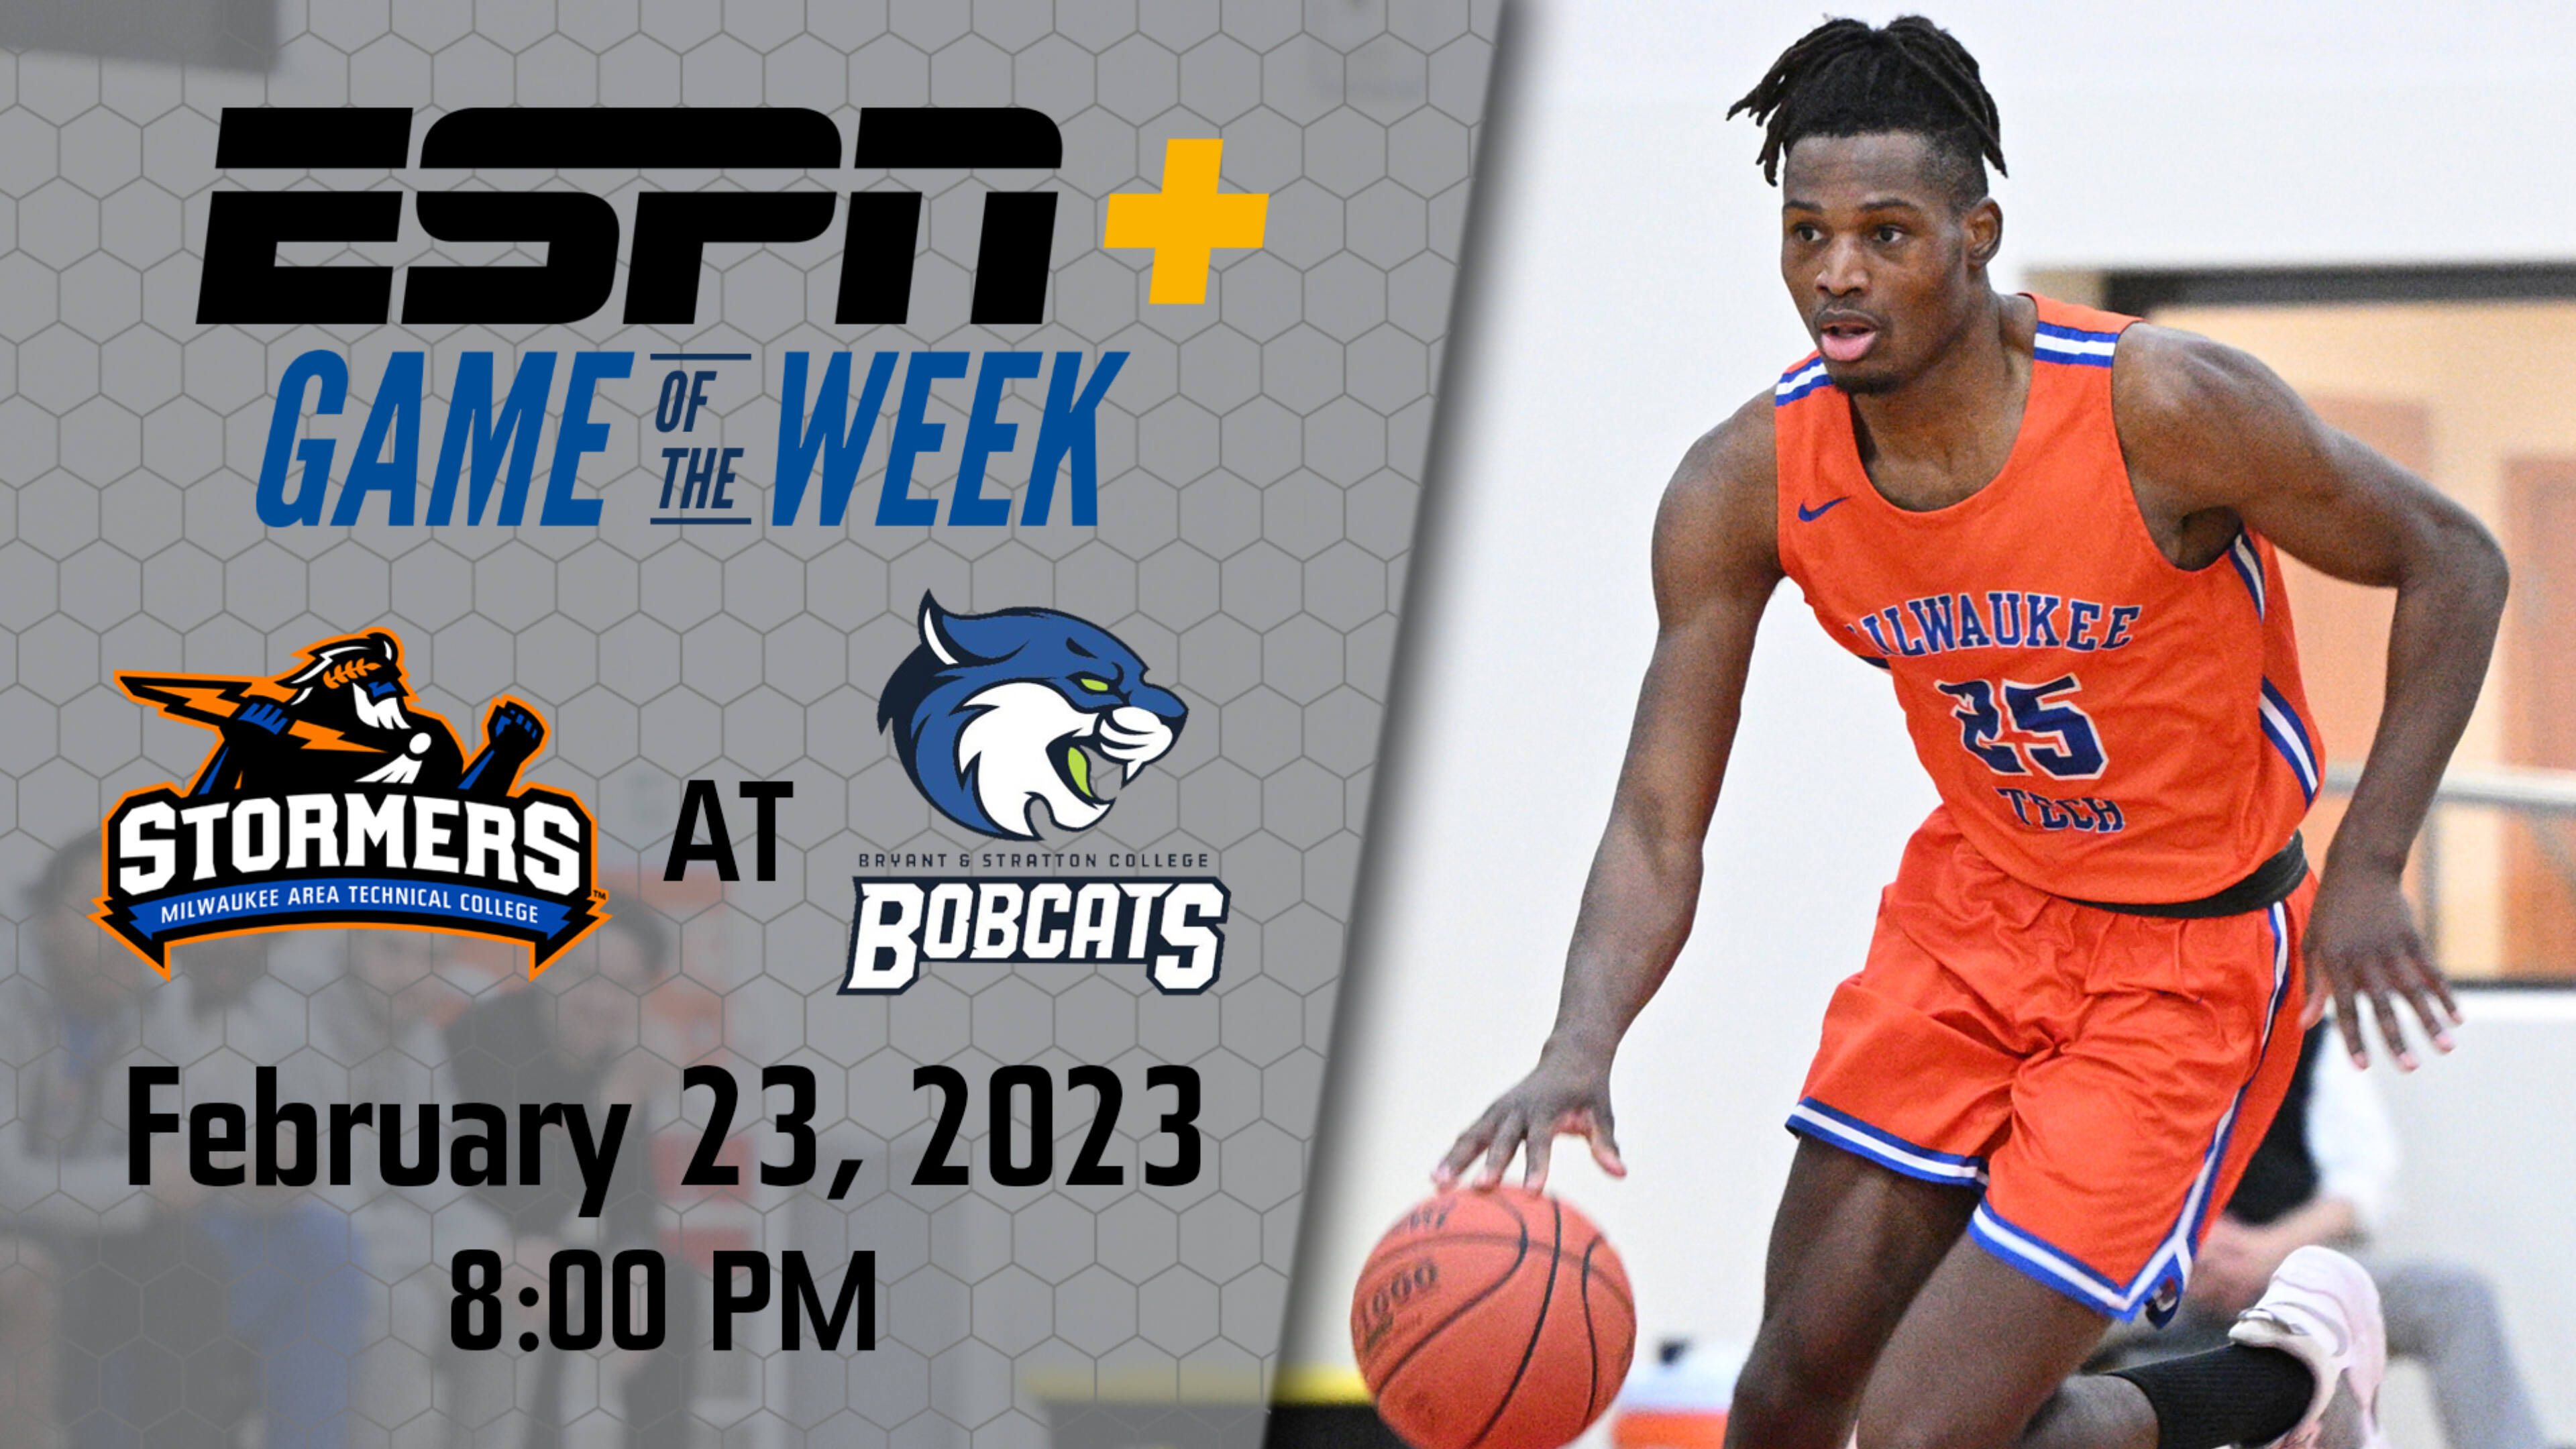 MATC MENS BASKETBALL GAME WILL BE LIVE-STREAMED ON ESPN+ MATC